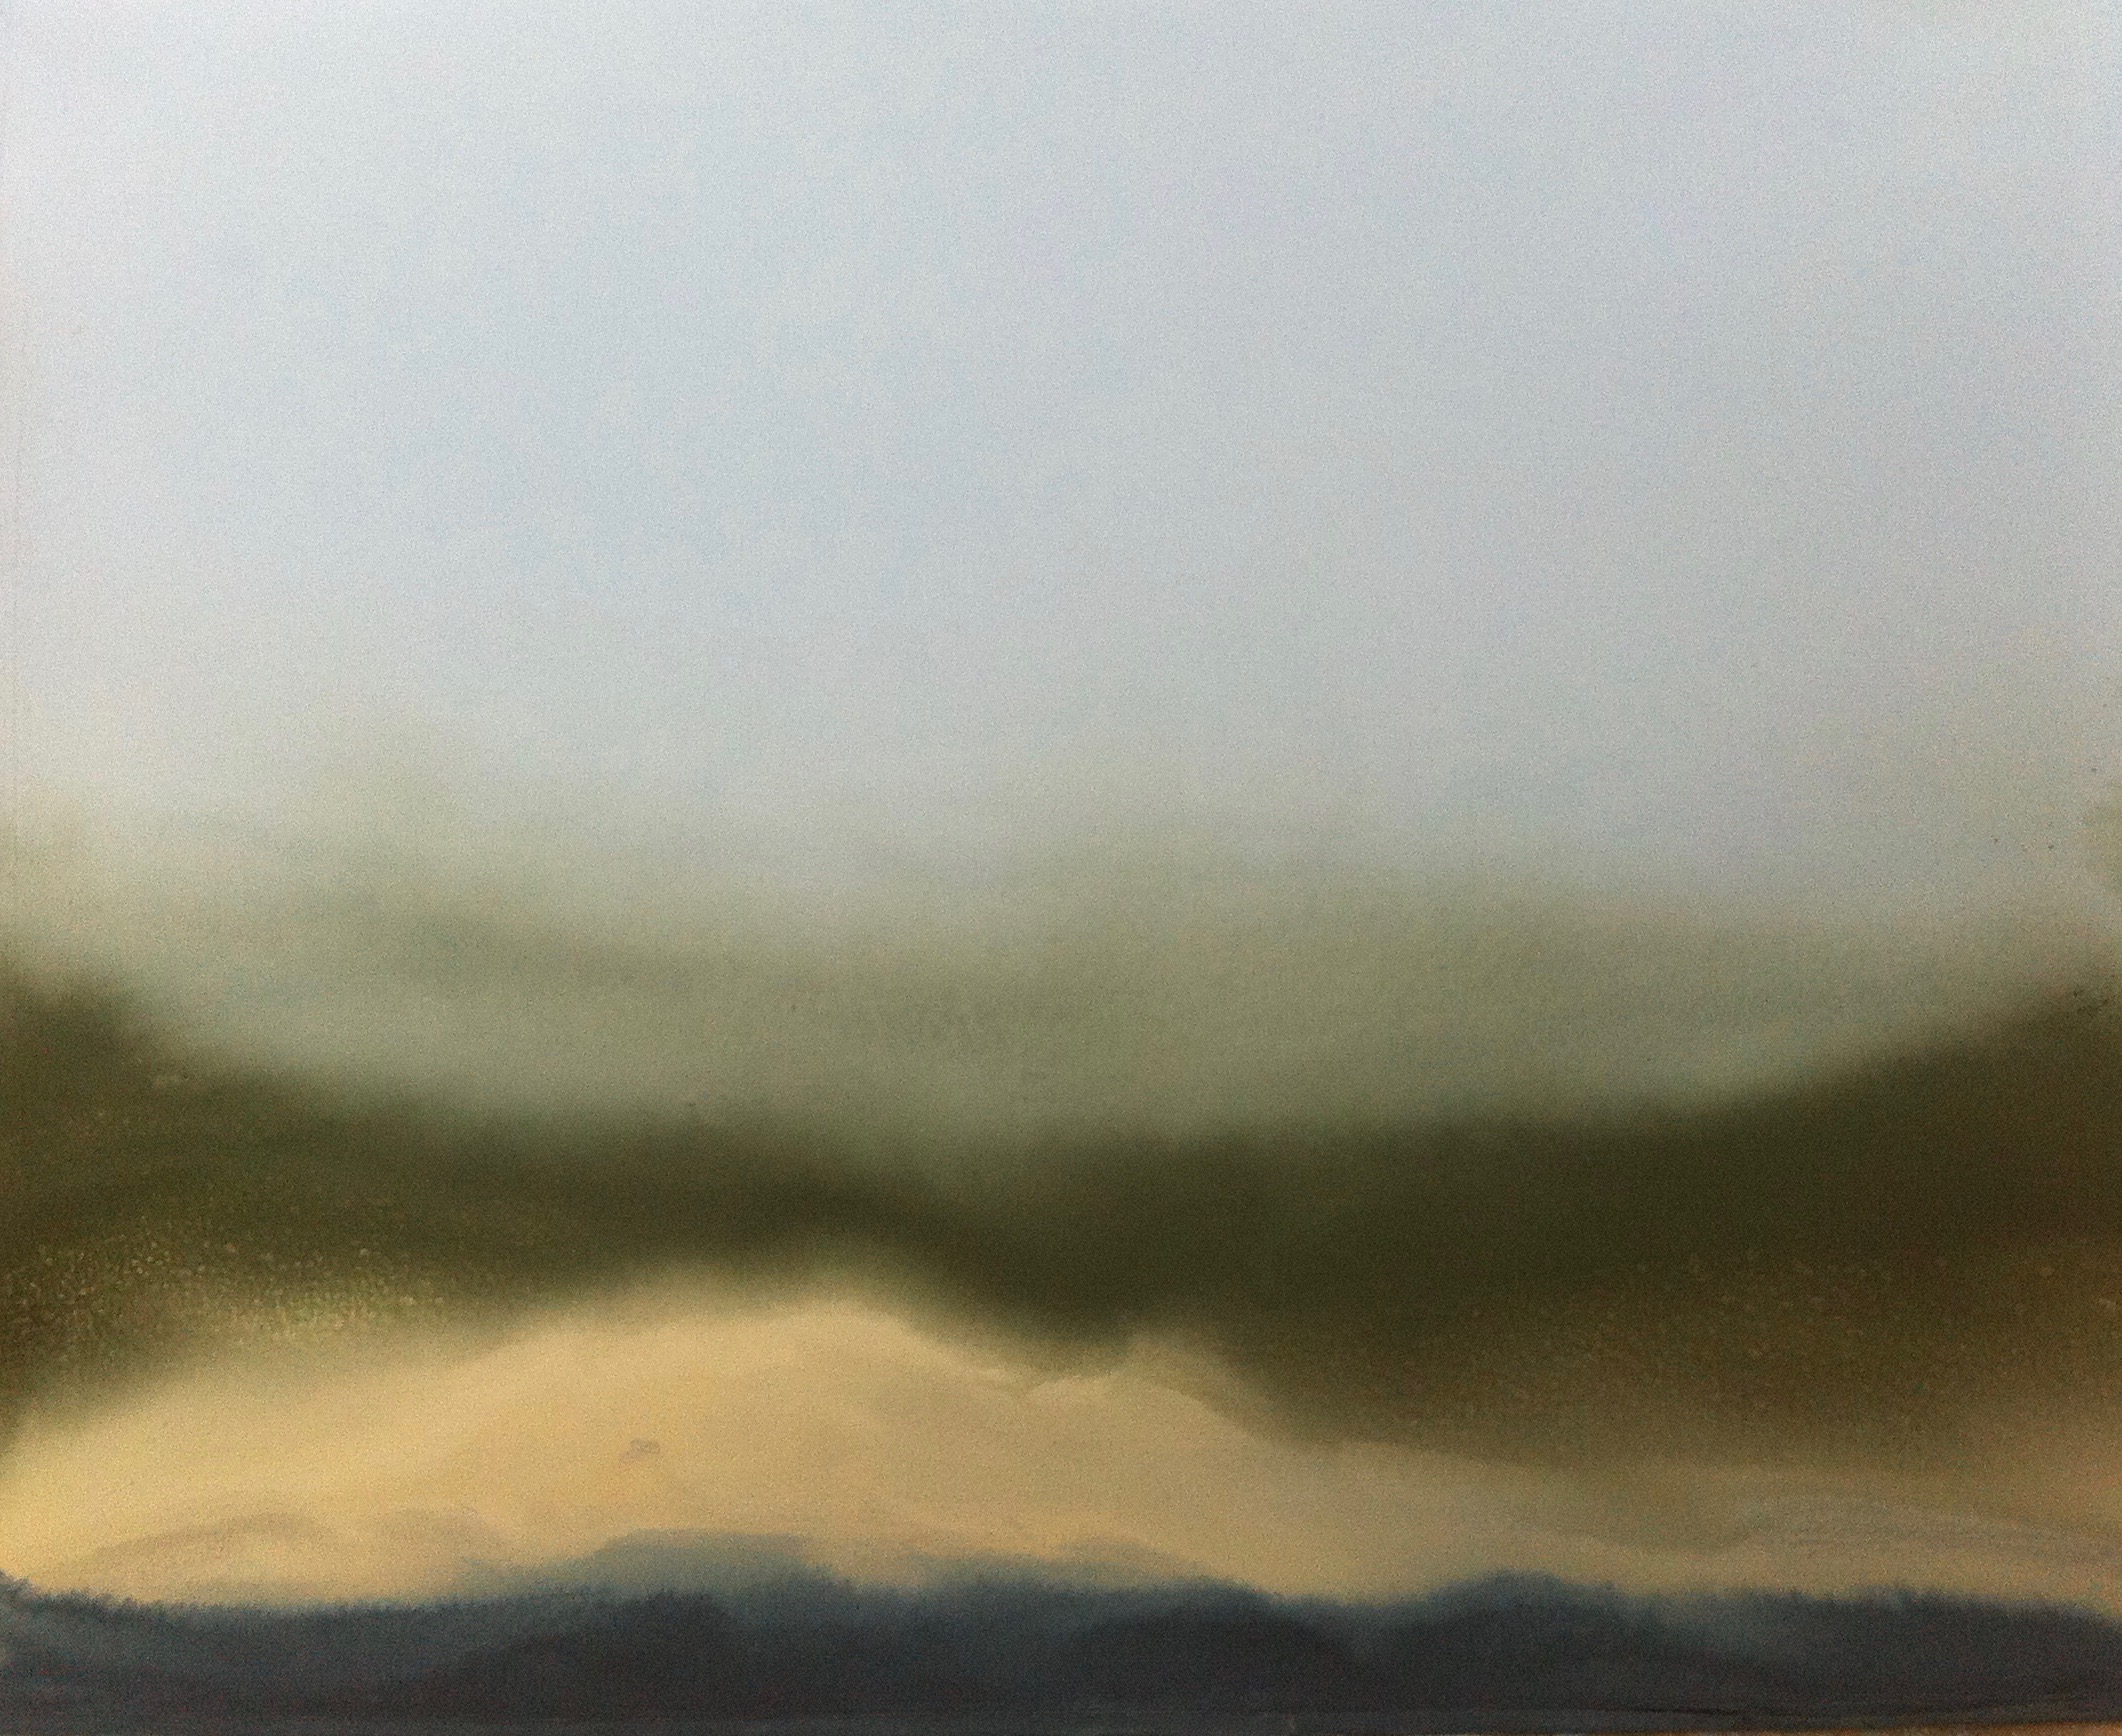  Untitled (Storm), 2013. Oil on Paper, 31" x 39”. Private Collection. 